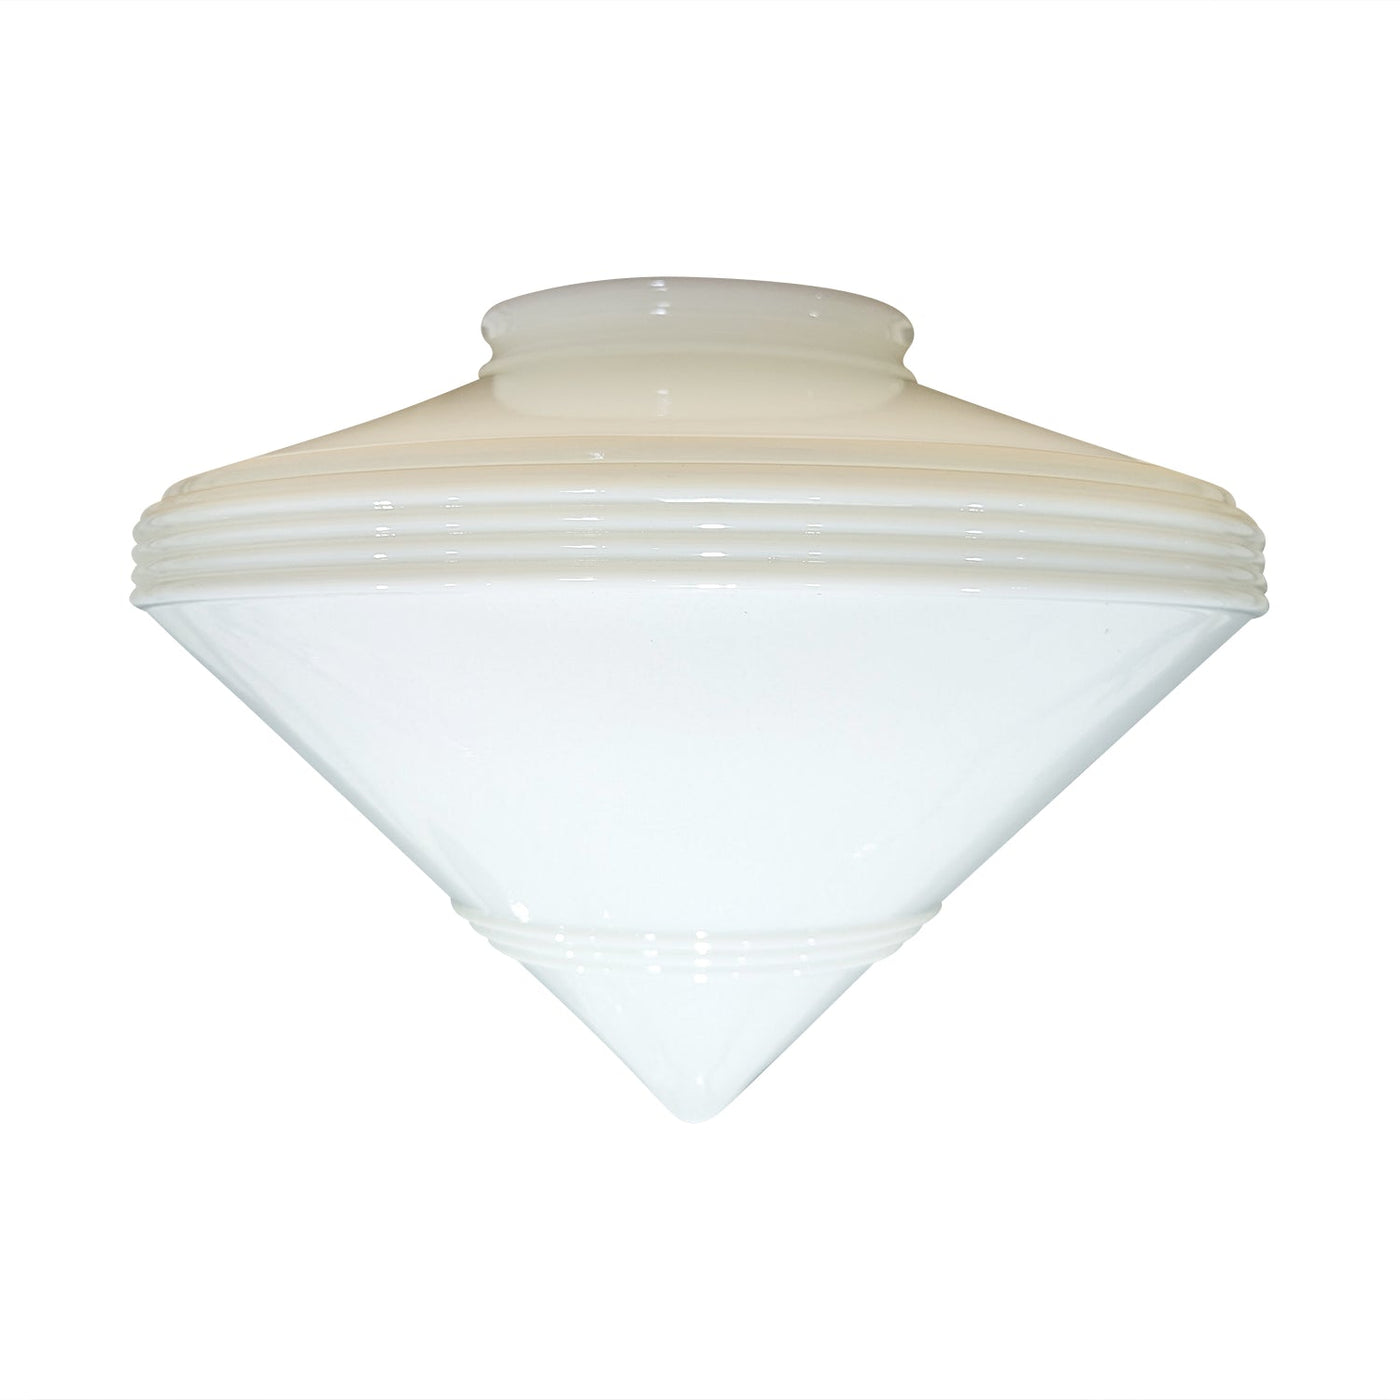 14 Inch Art Deco Style Milk Glass Light Shade (6 Inch Fitter)